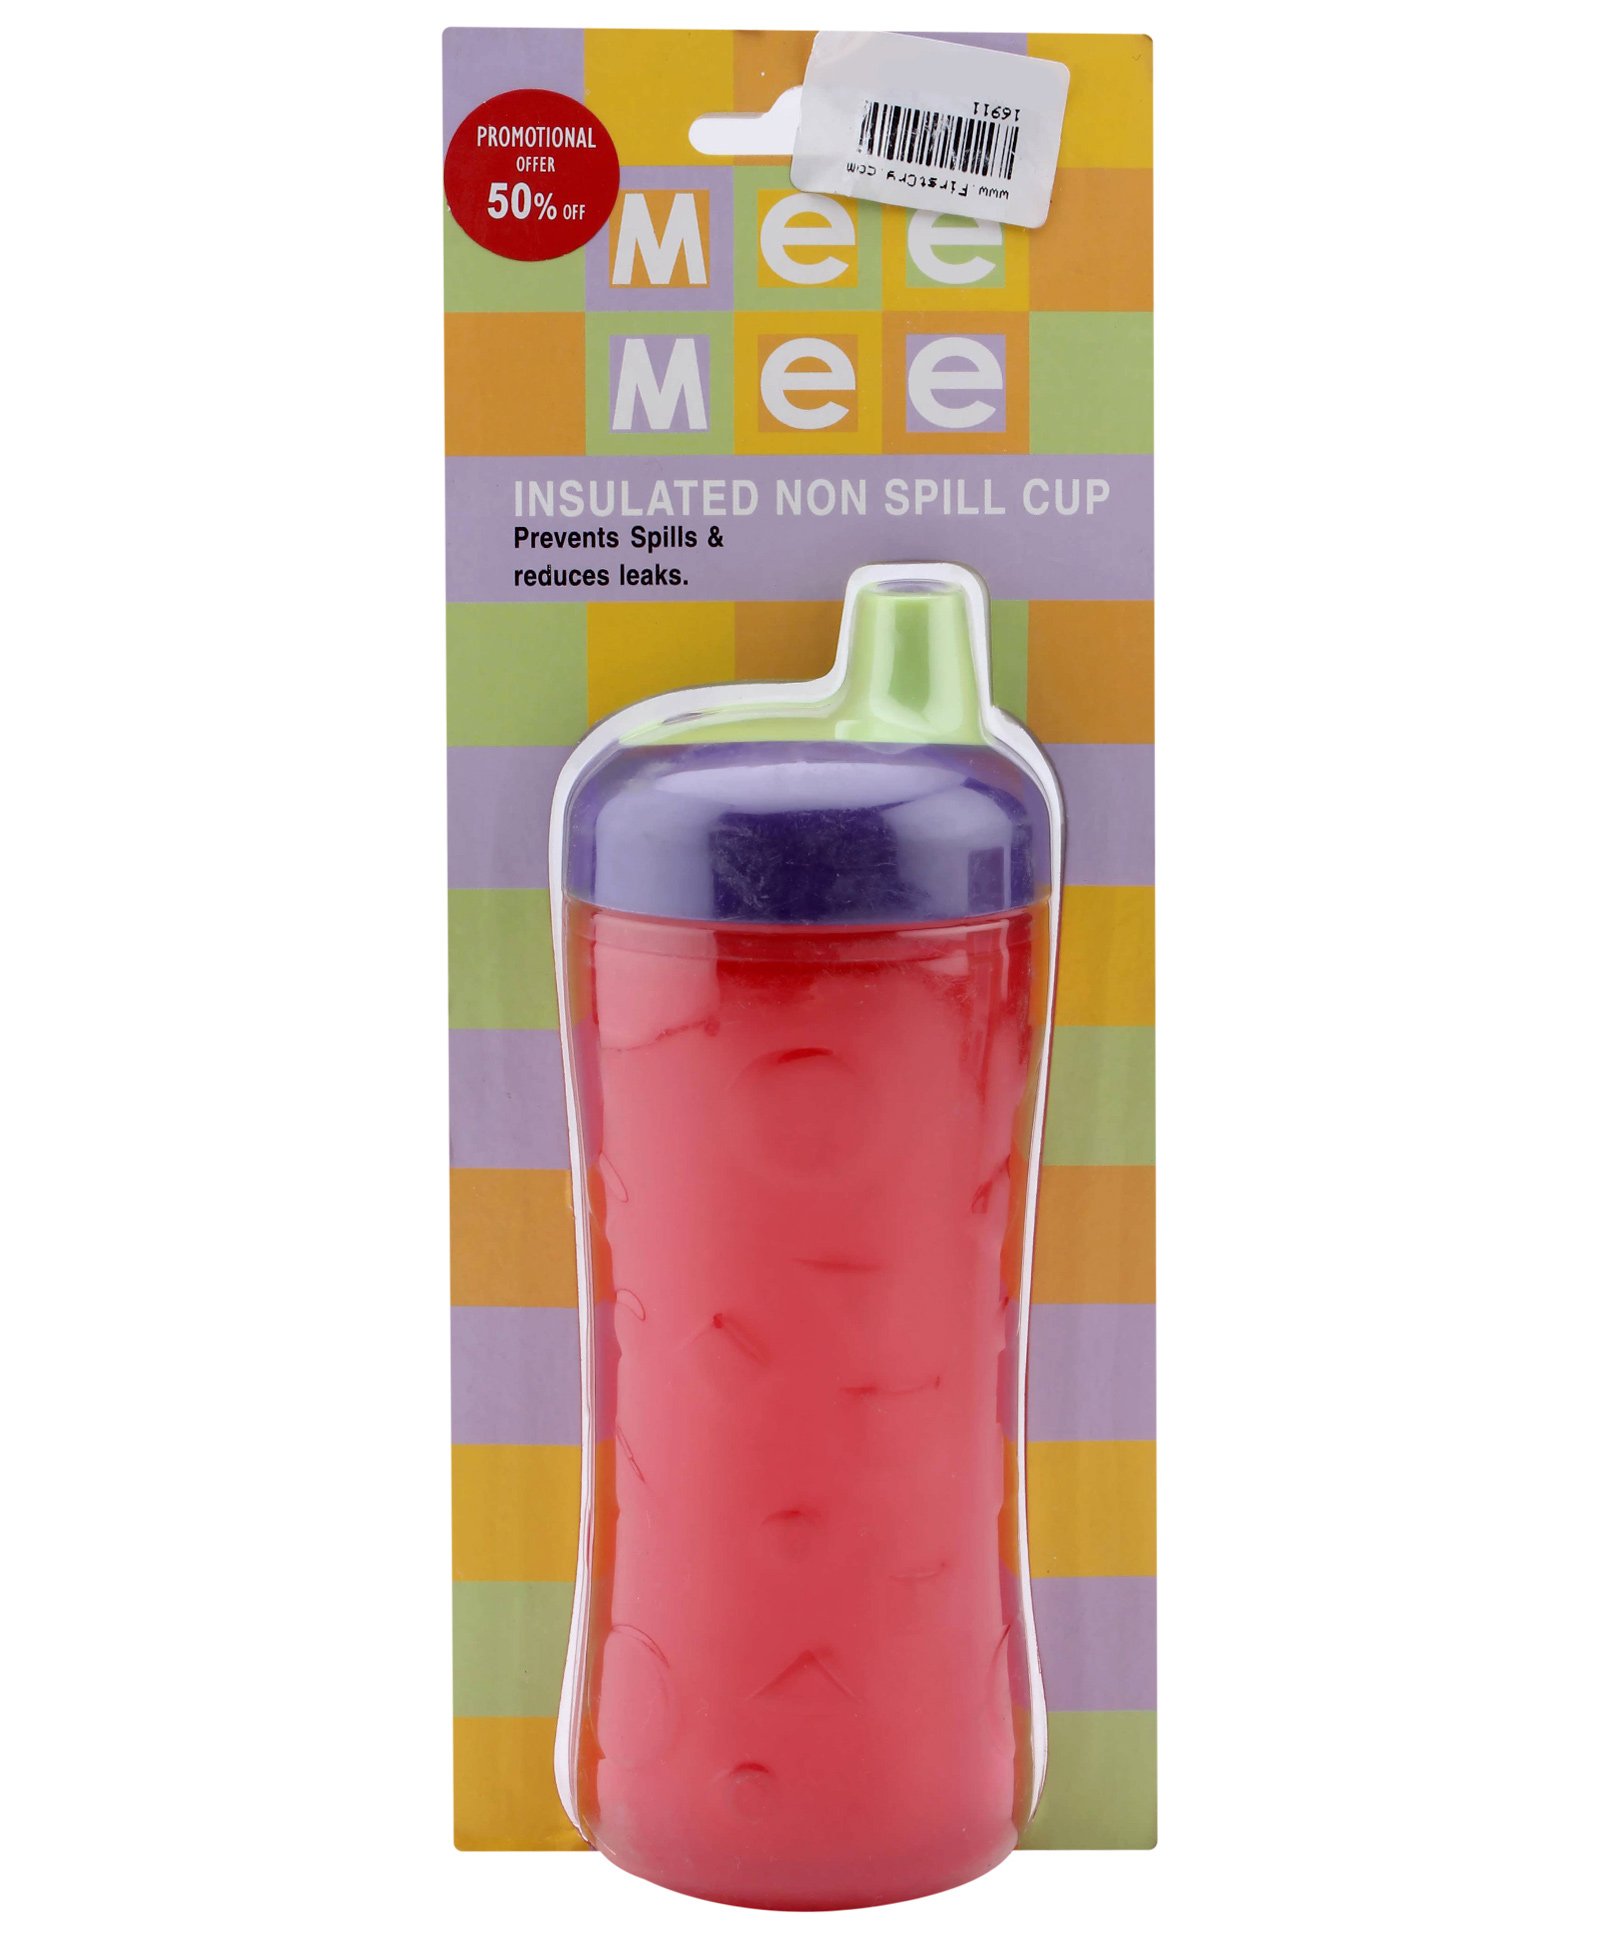 Mee Mee - Insulated Non Spill Cup